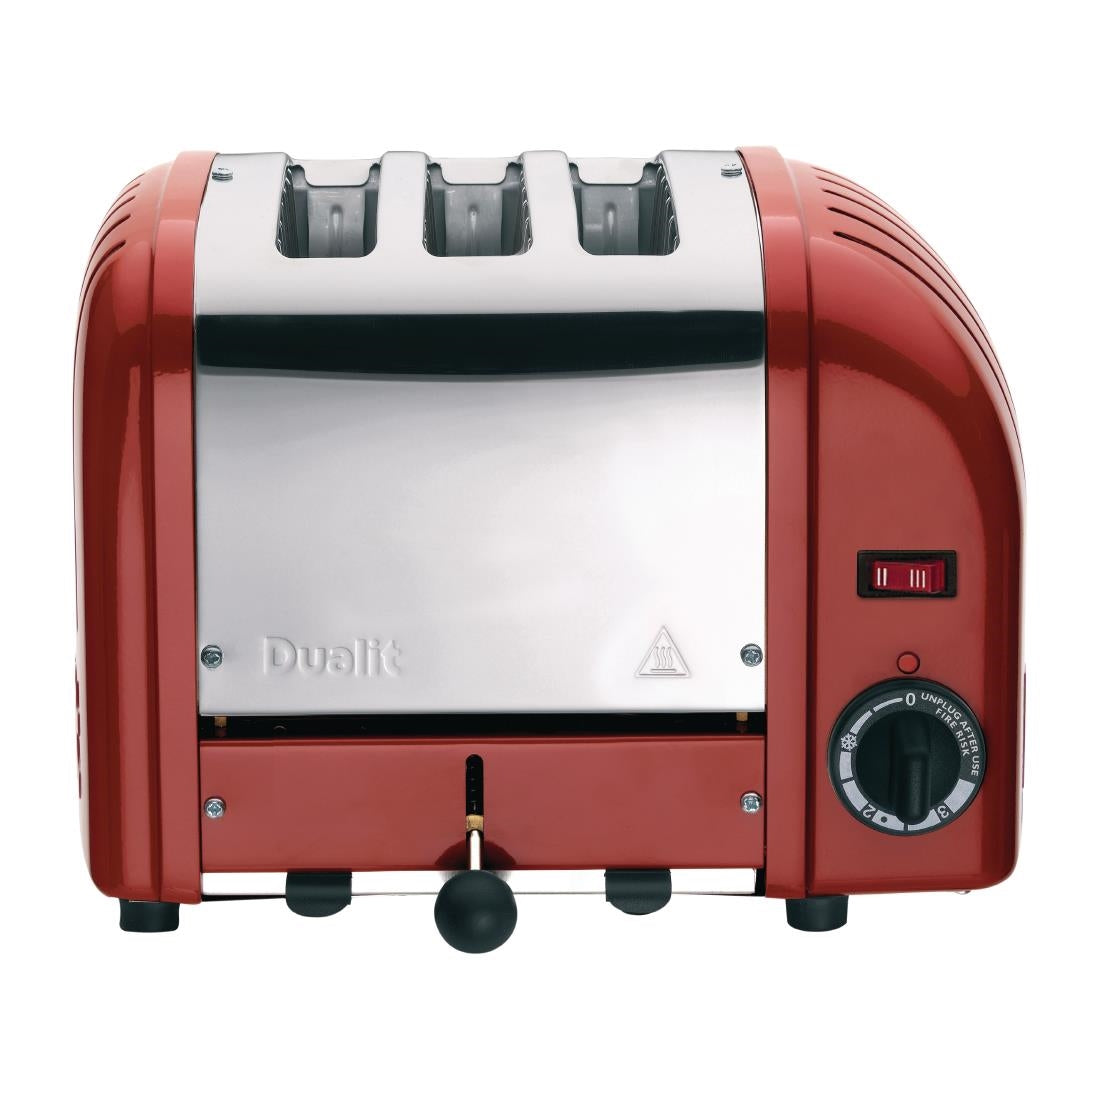 Dualit 3 Slice Vario Toaster Red 30085 JD Catering Equipment Solutions Ltd